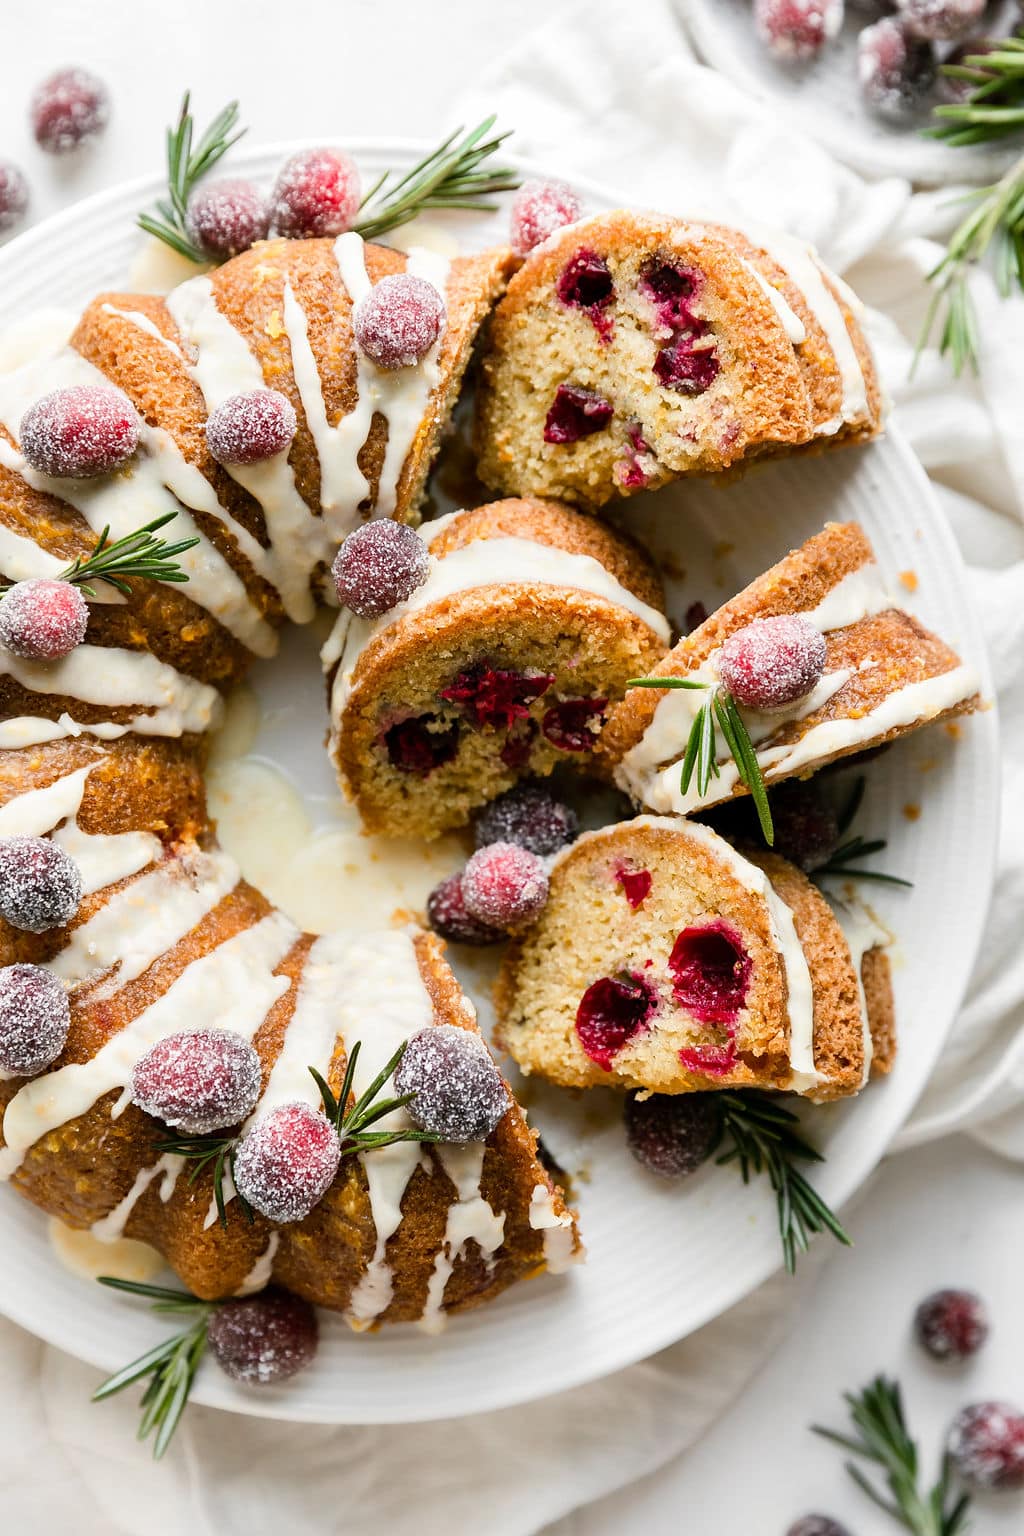 https://therealfooddietitians.com/wp-content/uploads/2022/12/Cranberry-Orange-Olive-Oil-Cake-10.jpg